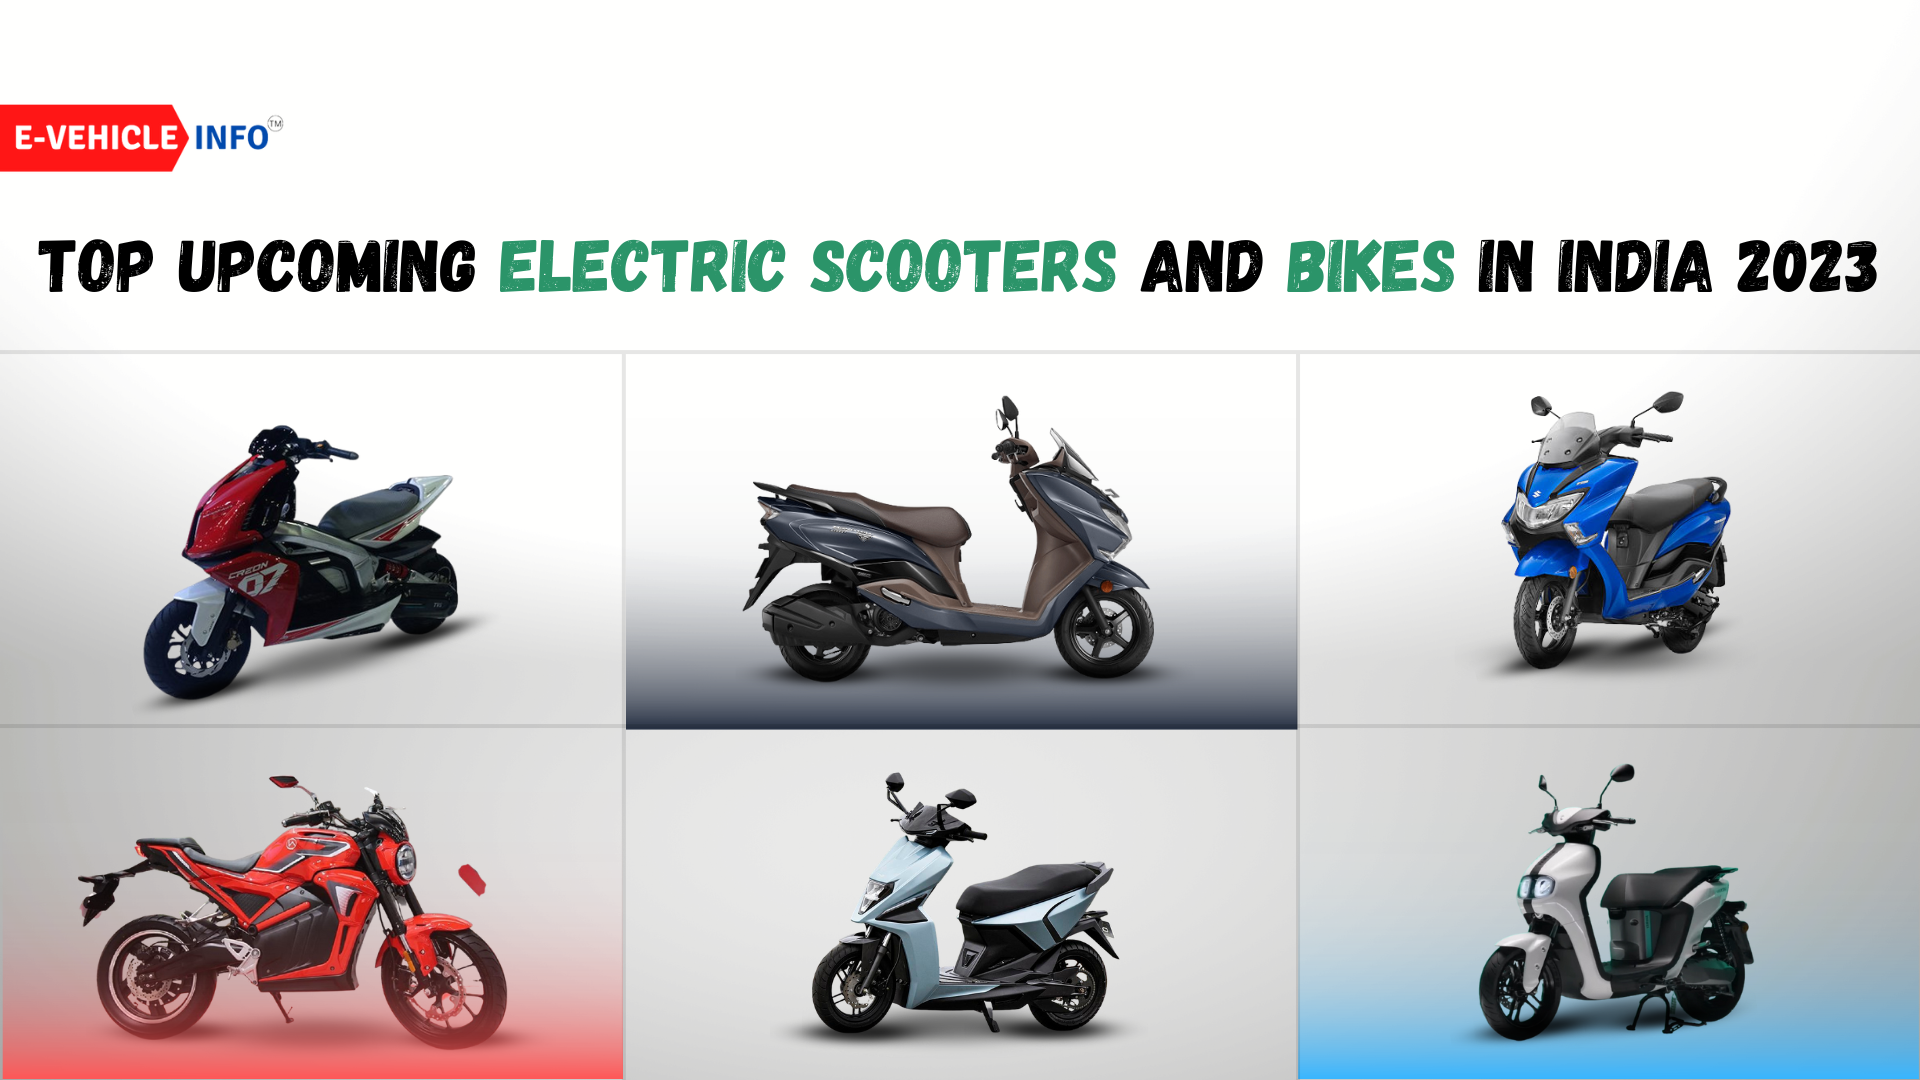 Top Upcoming Electric Scooters and Bikes in India 2023